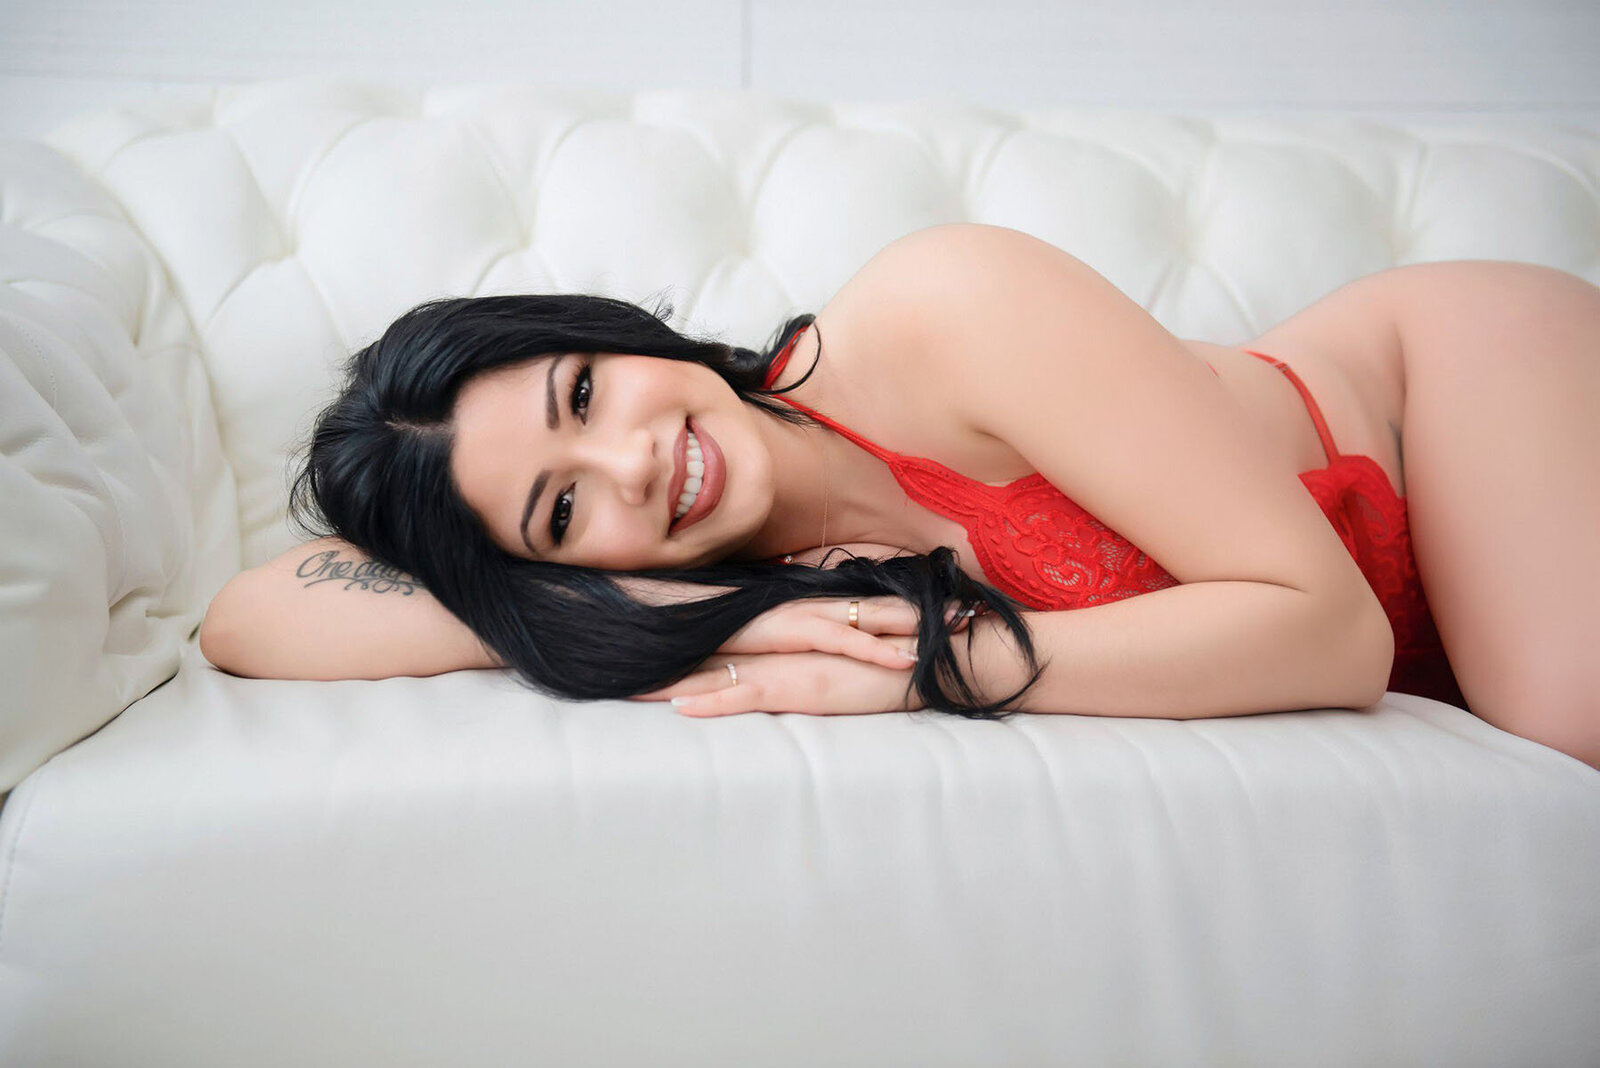 Young woman in red lace lingerie posing for boudoir portrait